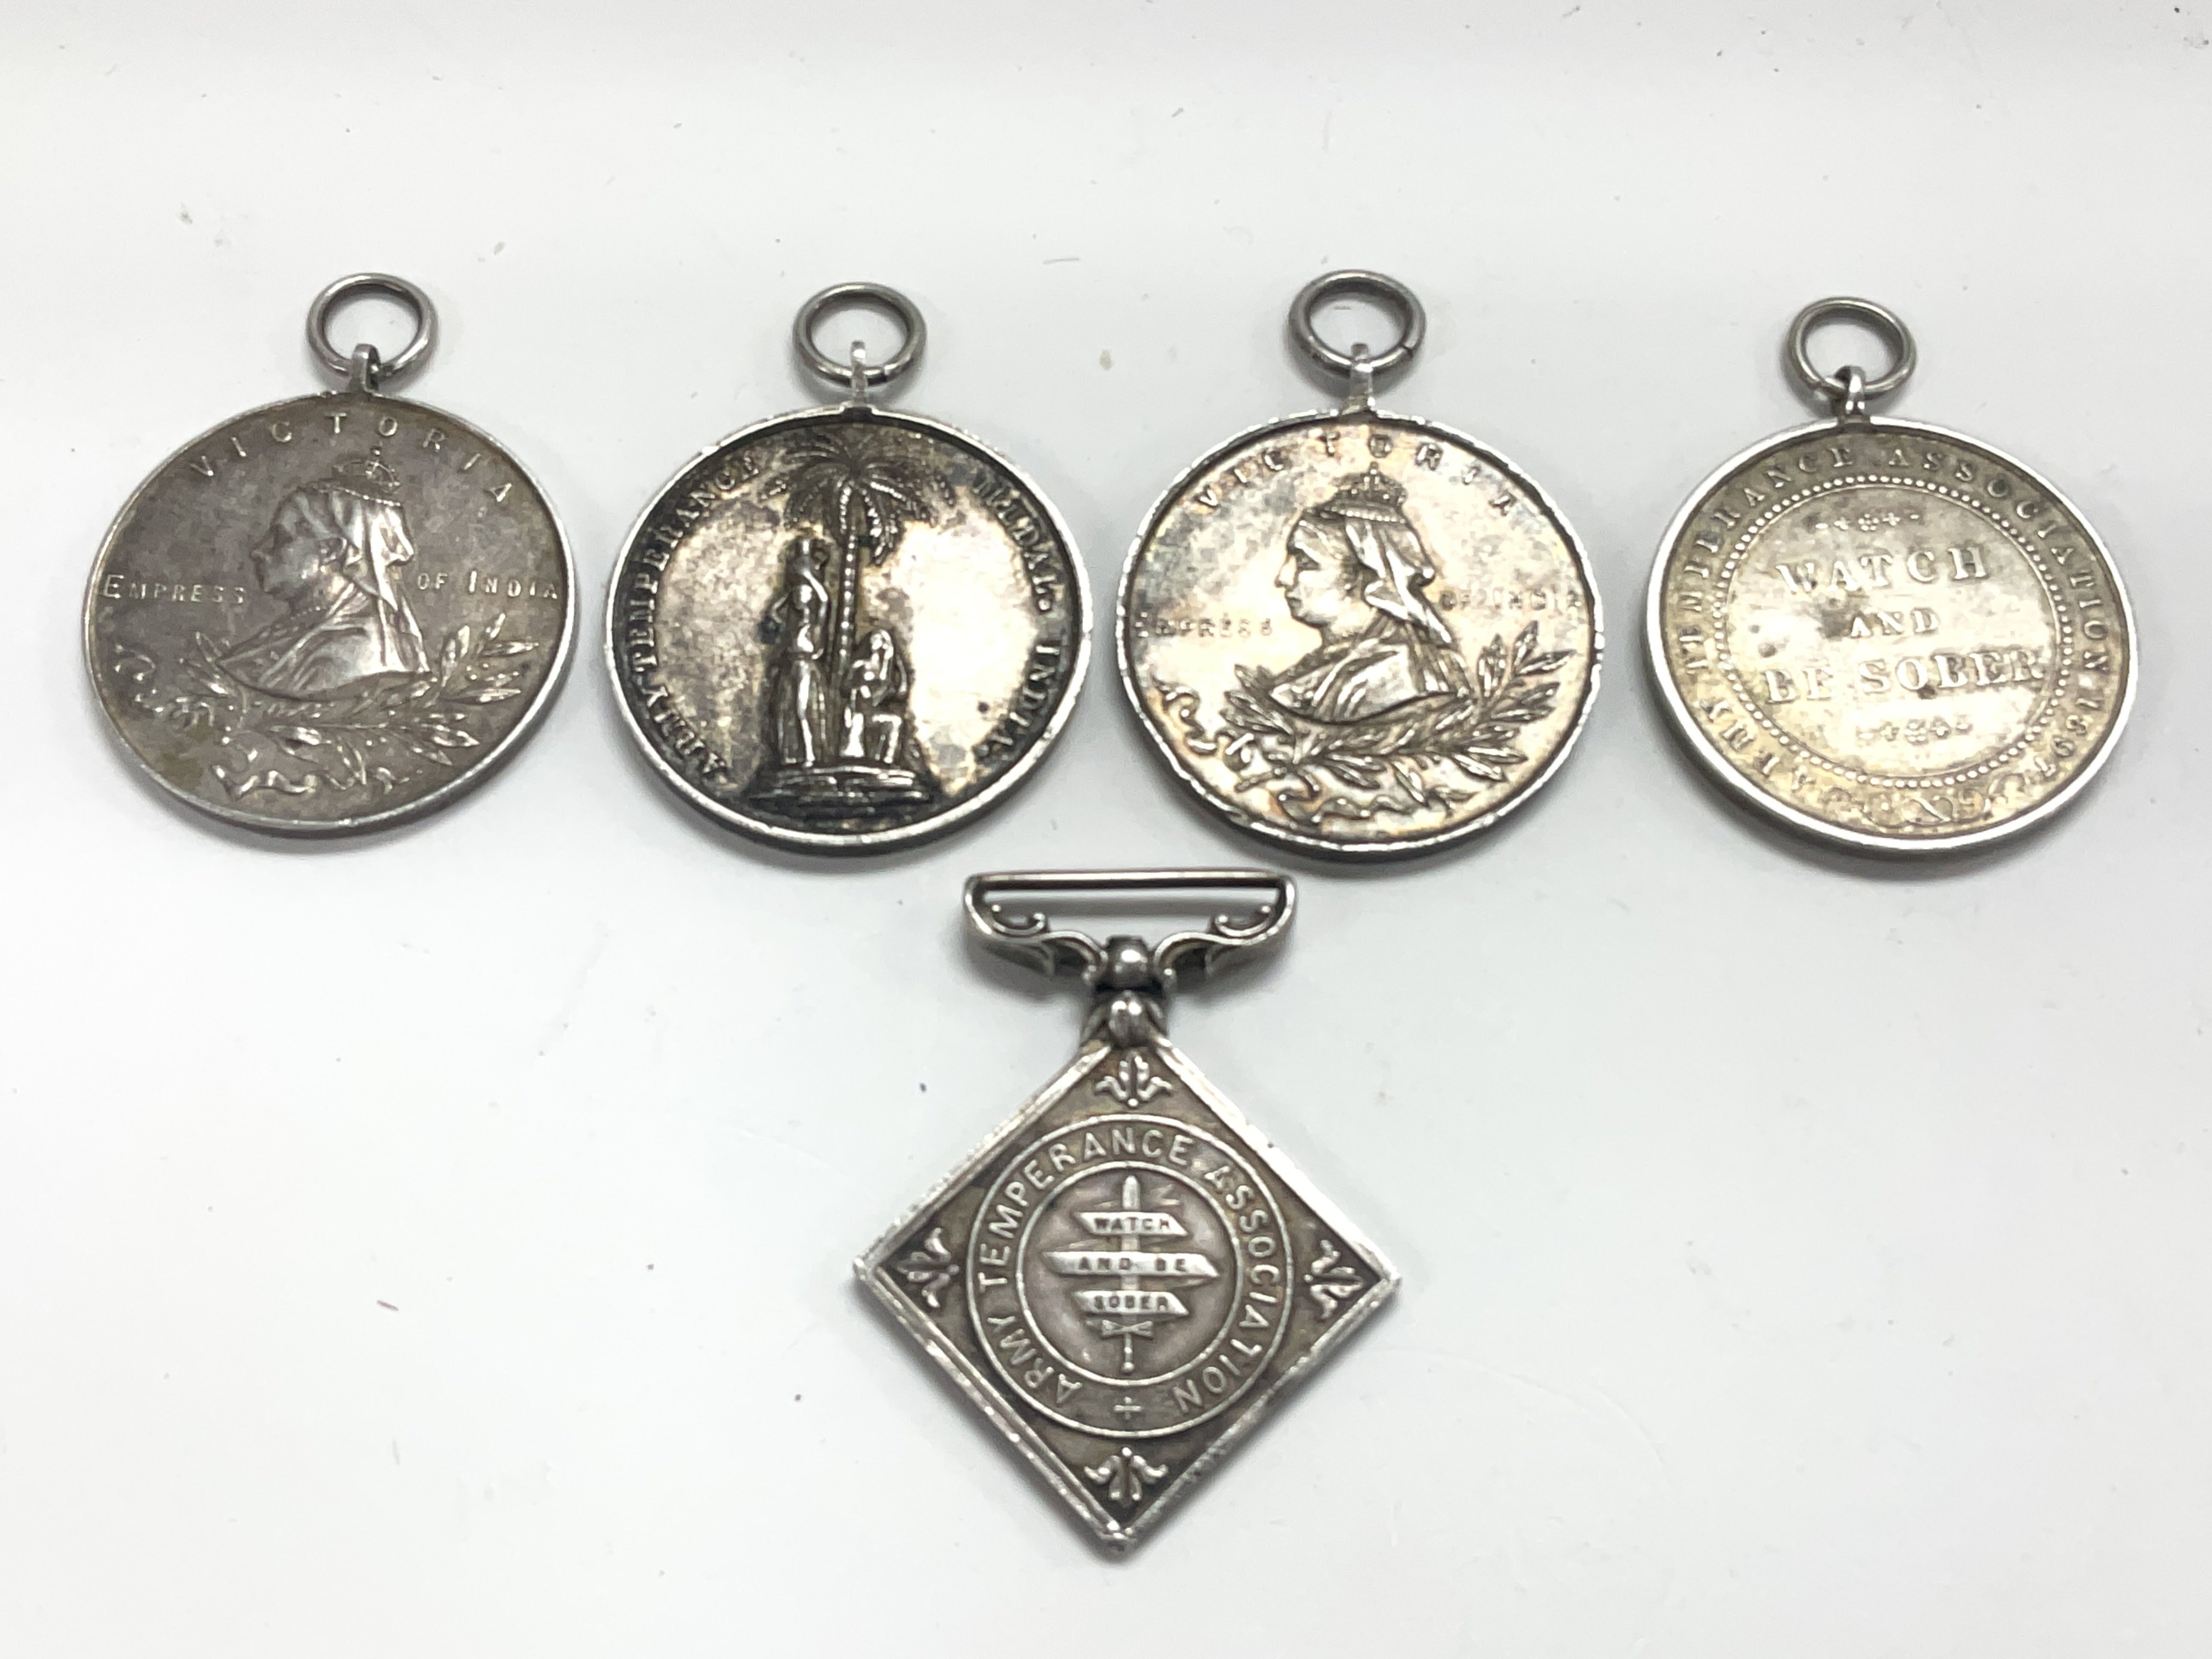 Temperance medals - Image 2 of 2